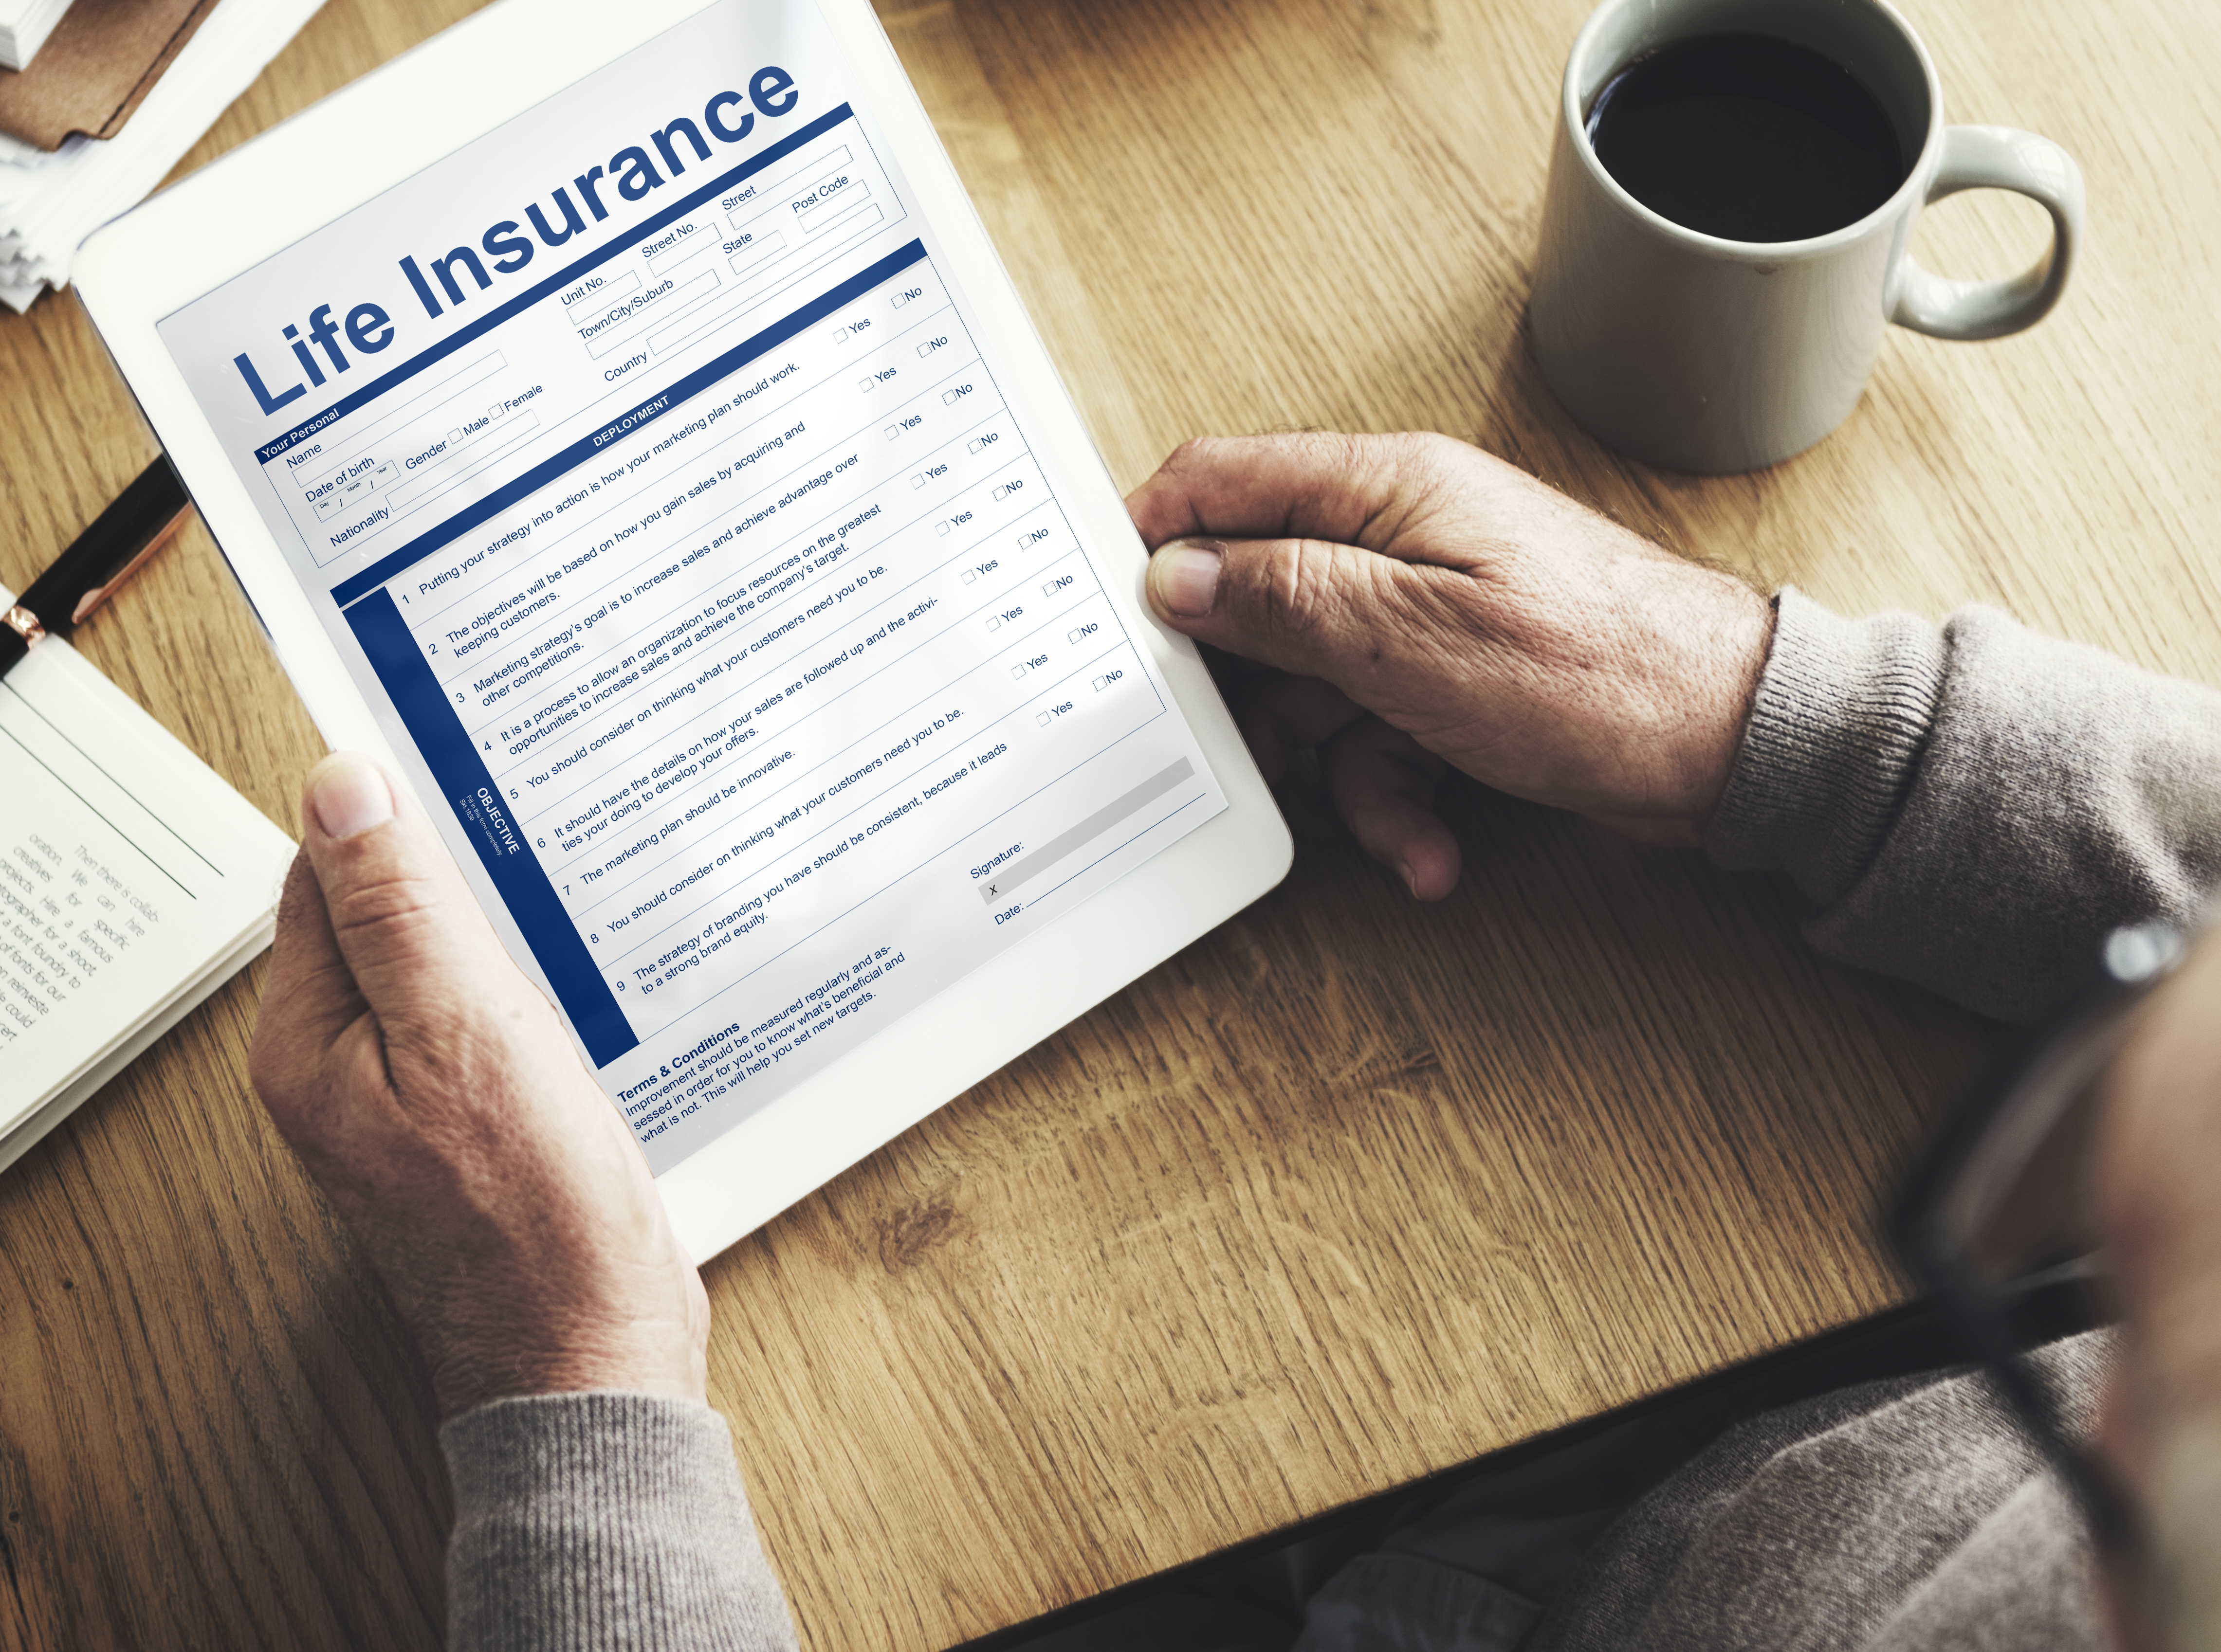 https://img.moneyduck.com/article_attachment/1661411791-life-insurance-policy-terms-use-concept.jpg